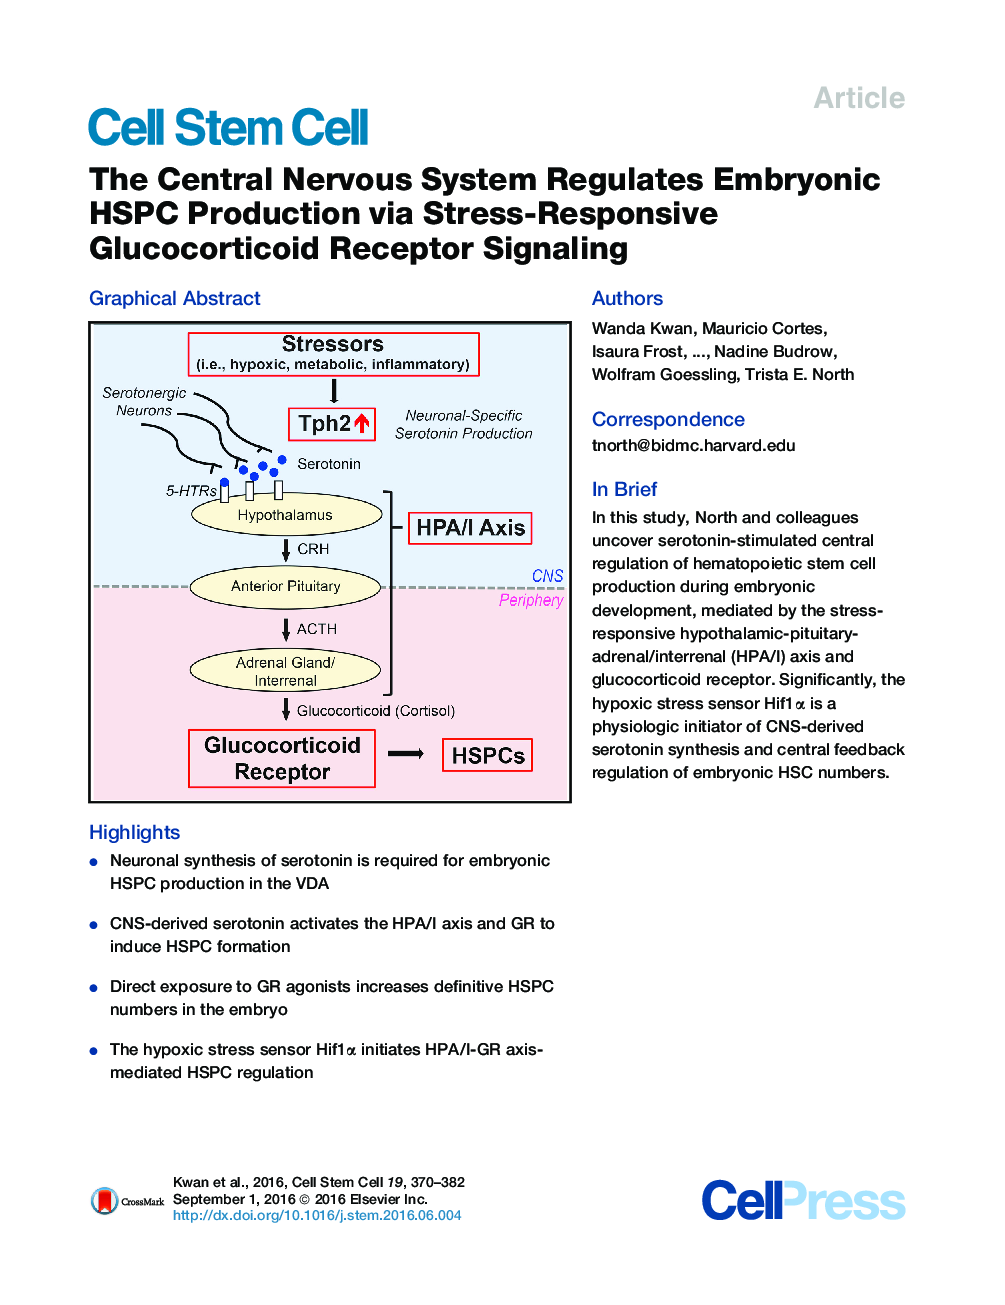 The Central Nervous System Regulates Embryonic HSPC Production via Stress-Responsive Glucocorticoid Receptor Signaling